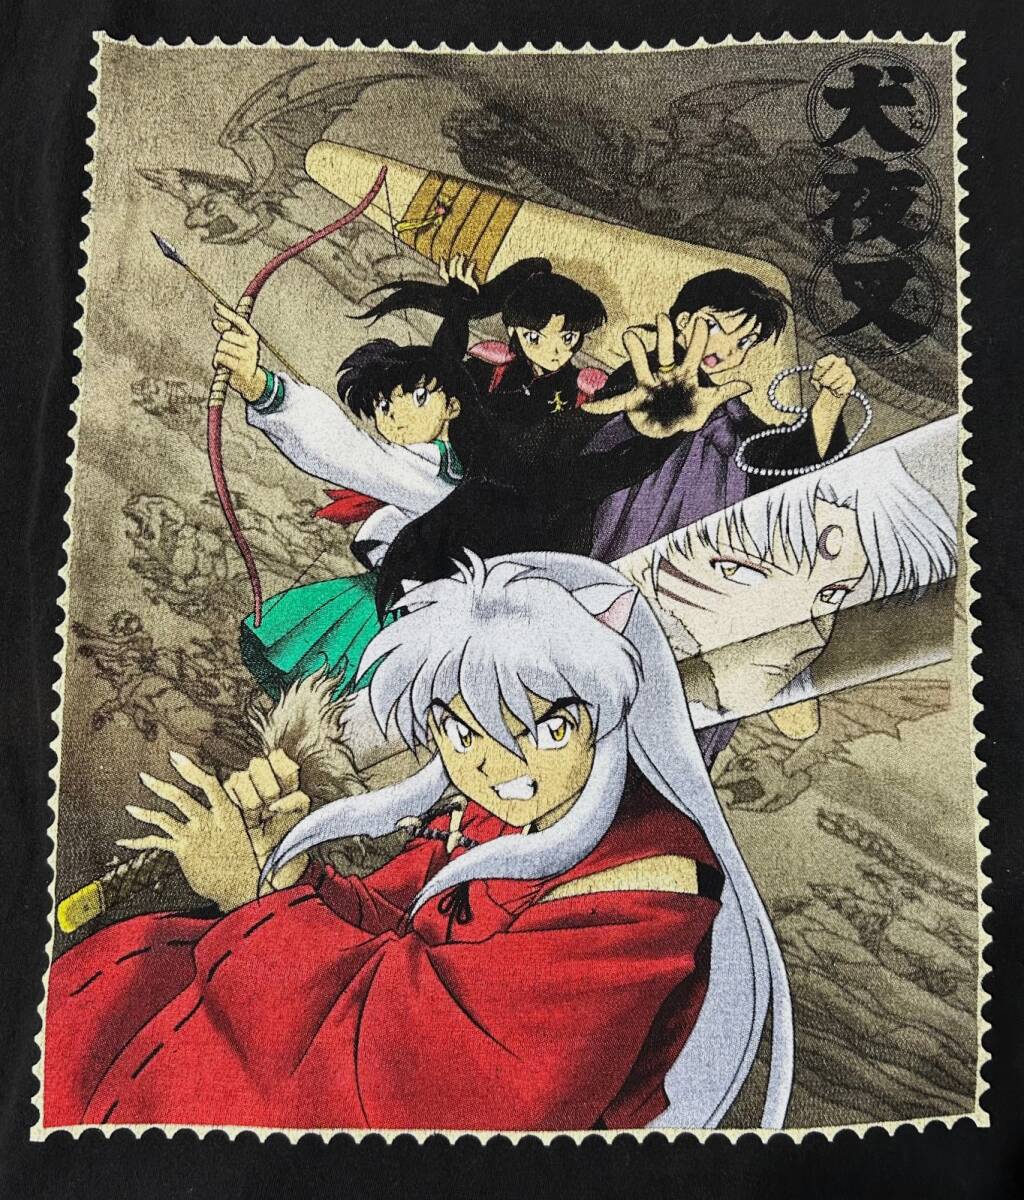 00s INUYASHA 犬夜叉 Tシャツ L ヴィンテージ アニメT レア 両面プリント 逆プリント_画像2